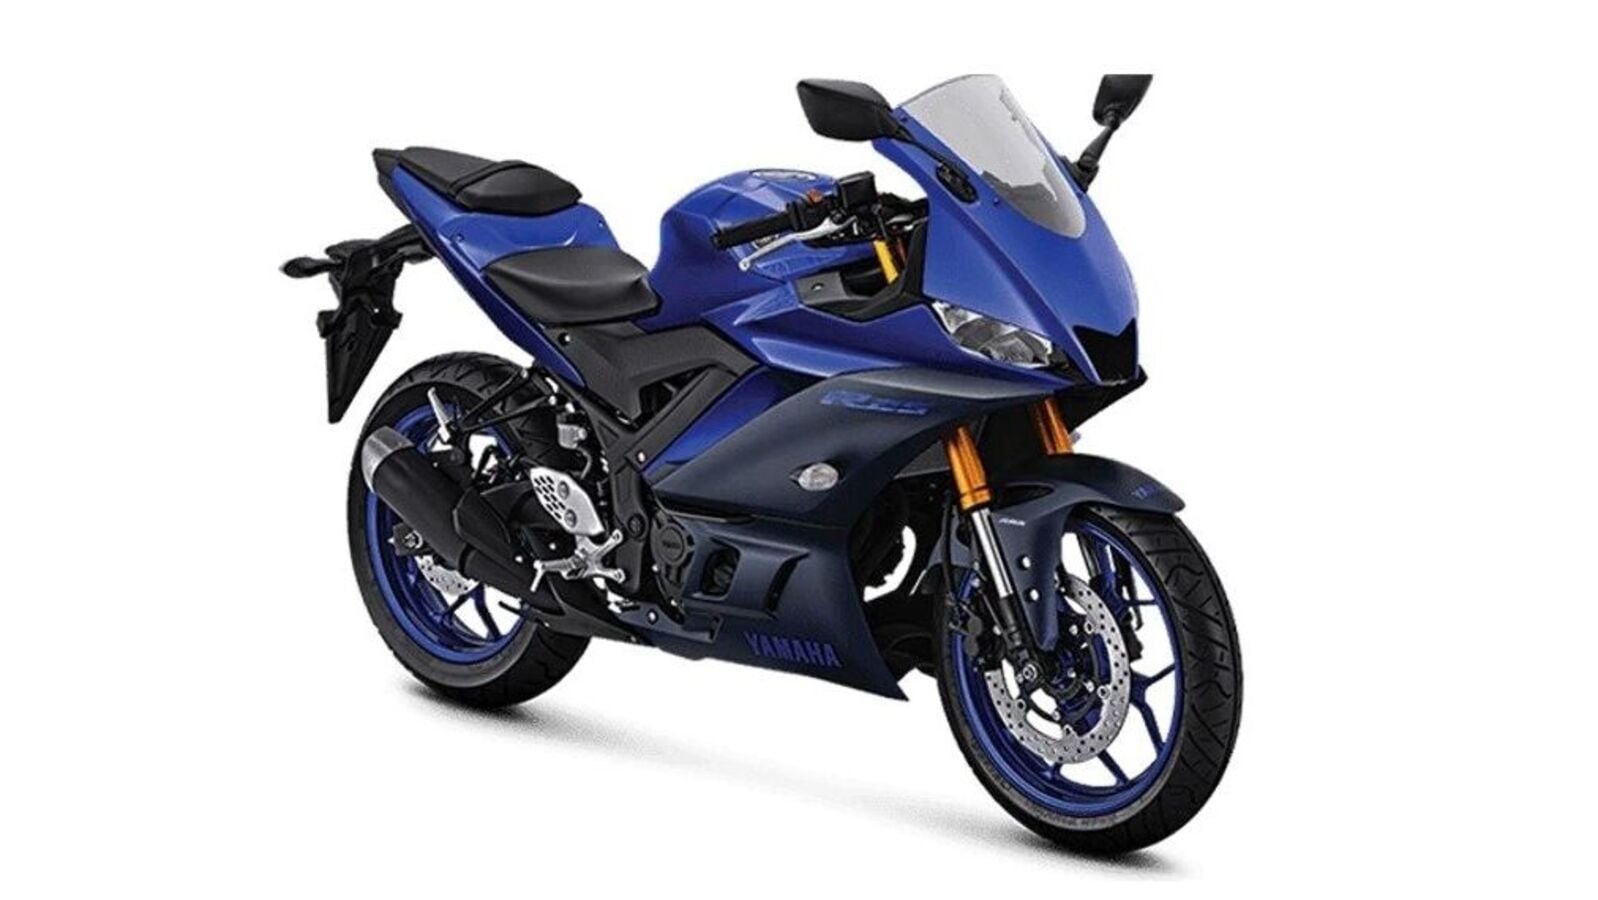 Yamaha YZF-R25 updated with new stealthy colour options for 2022